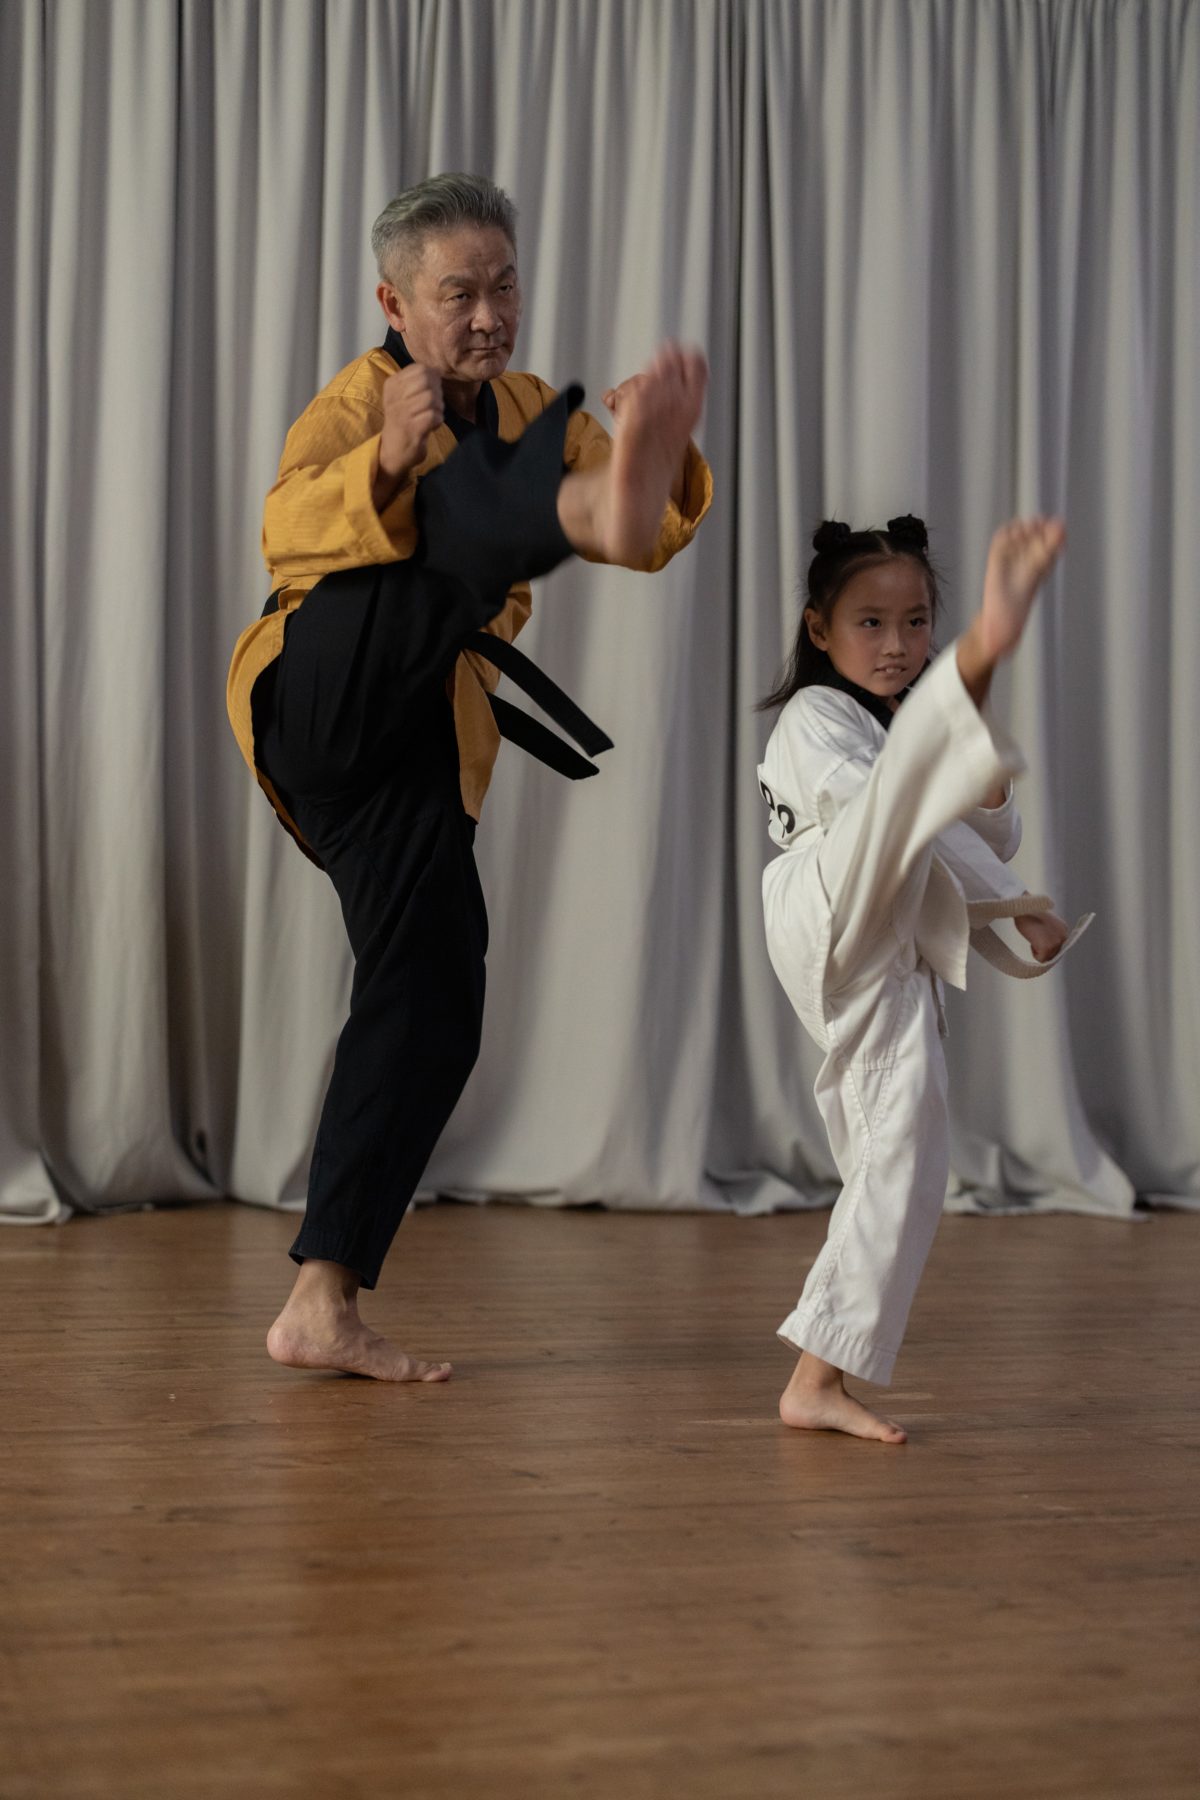 Sensei and young student learning a Karate kick.